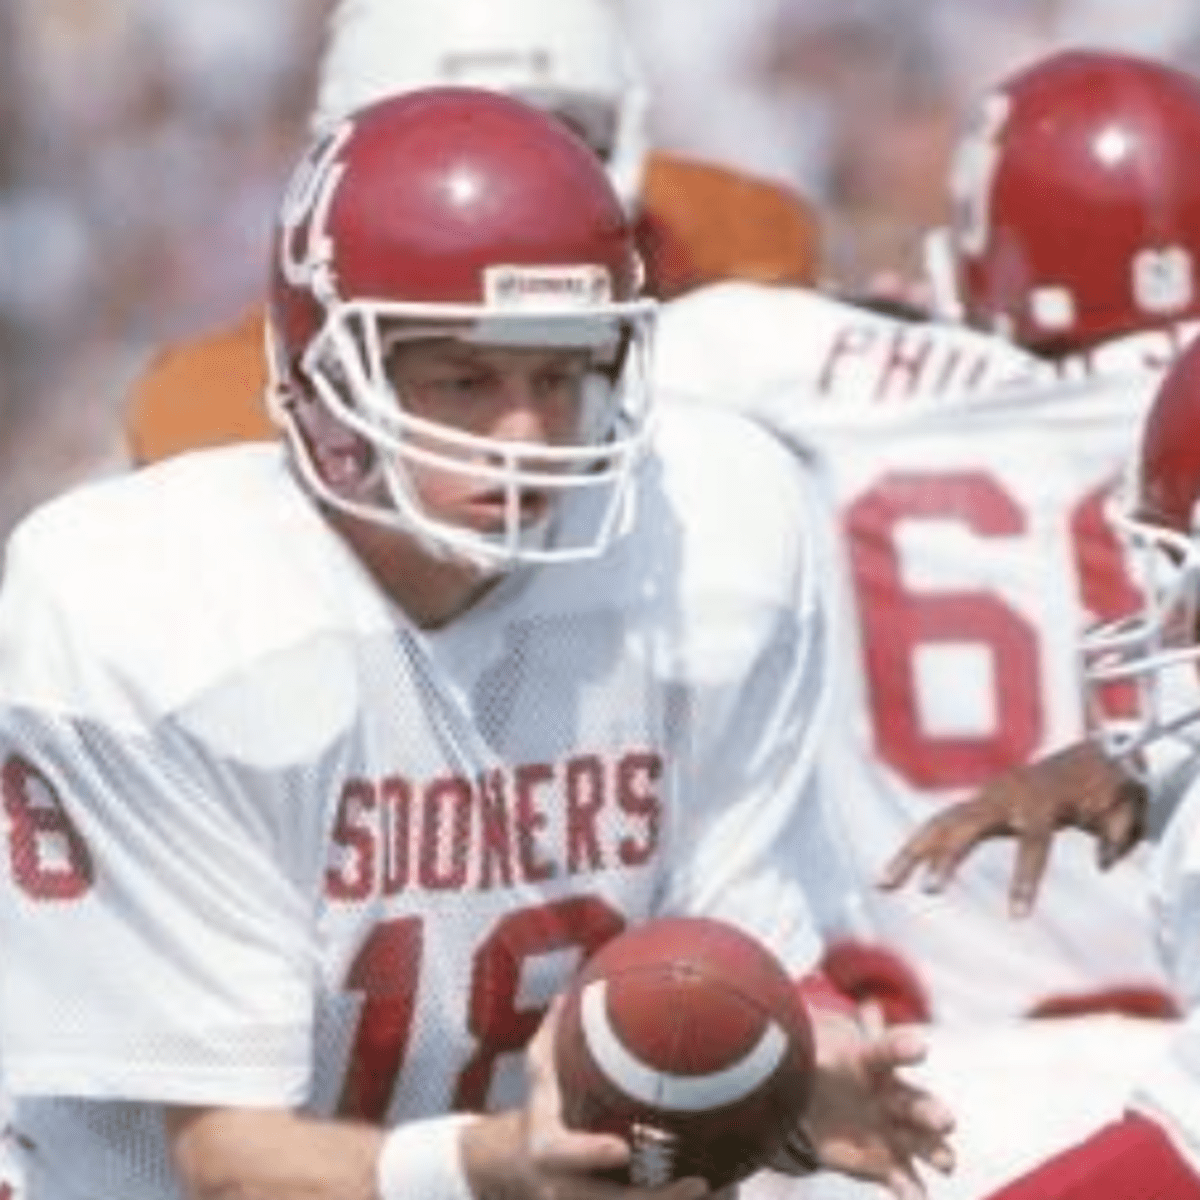 Troy Playing For The Sooners